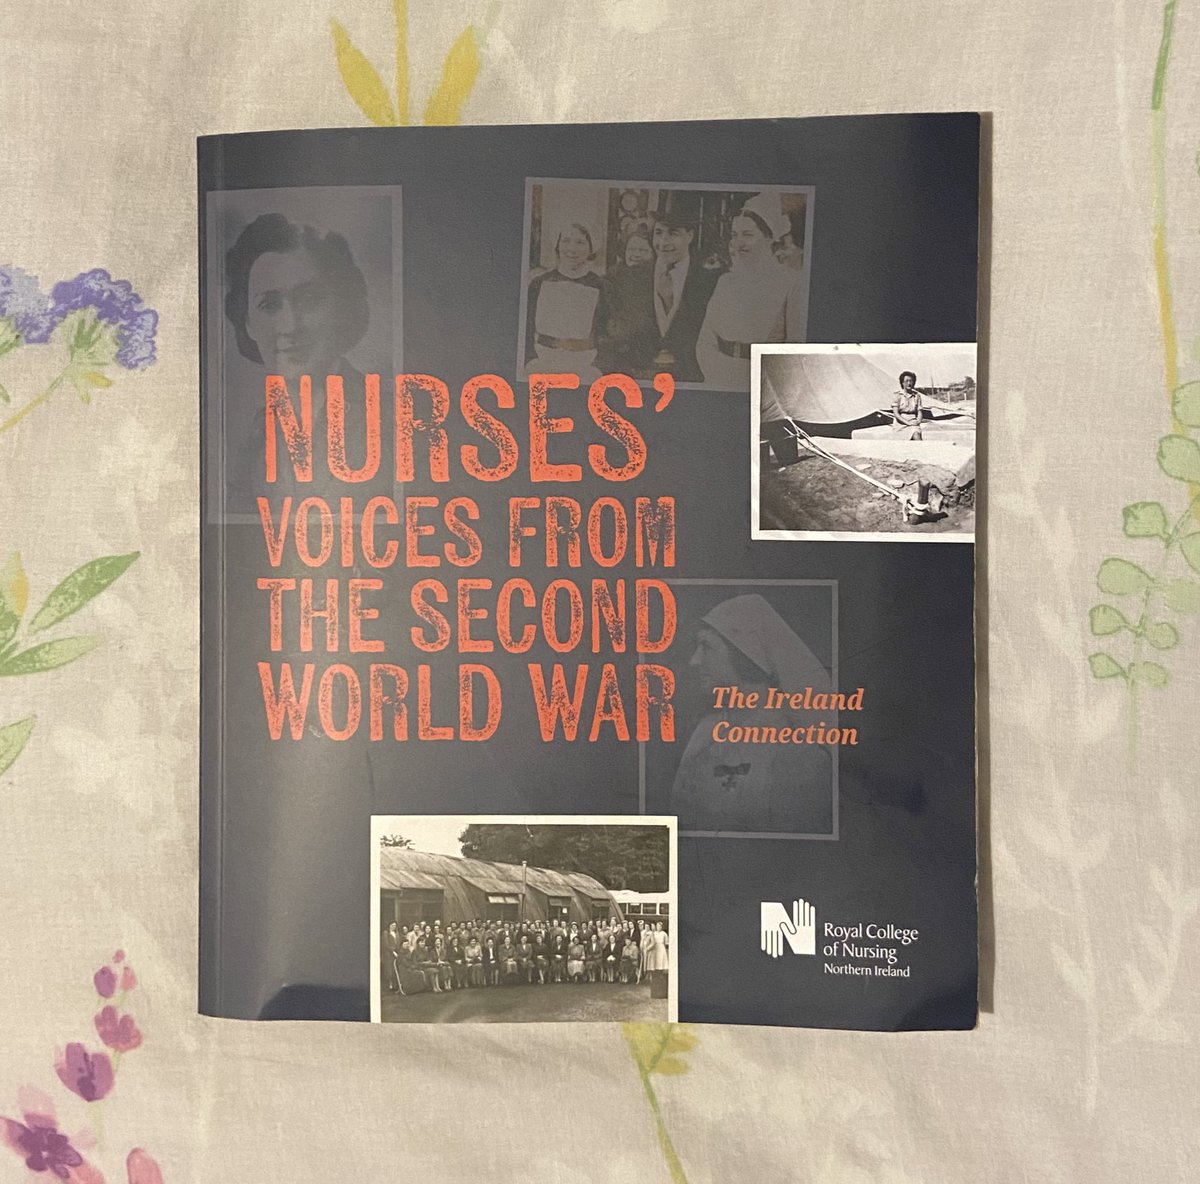 Feeling very privileged and honoured to have participated yesterday in the book launch event to commemorate nurses from across Ireland who served in WWII❤️ Yesterday was just a snippet of the untold stories and their courage … an absolute inspiration, a day I will never forget.